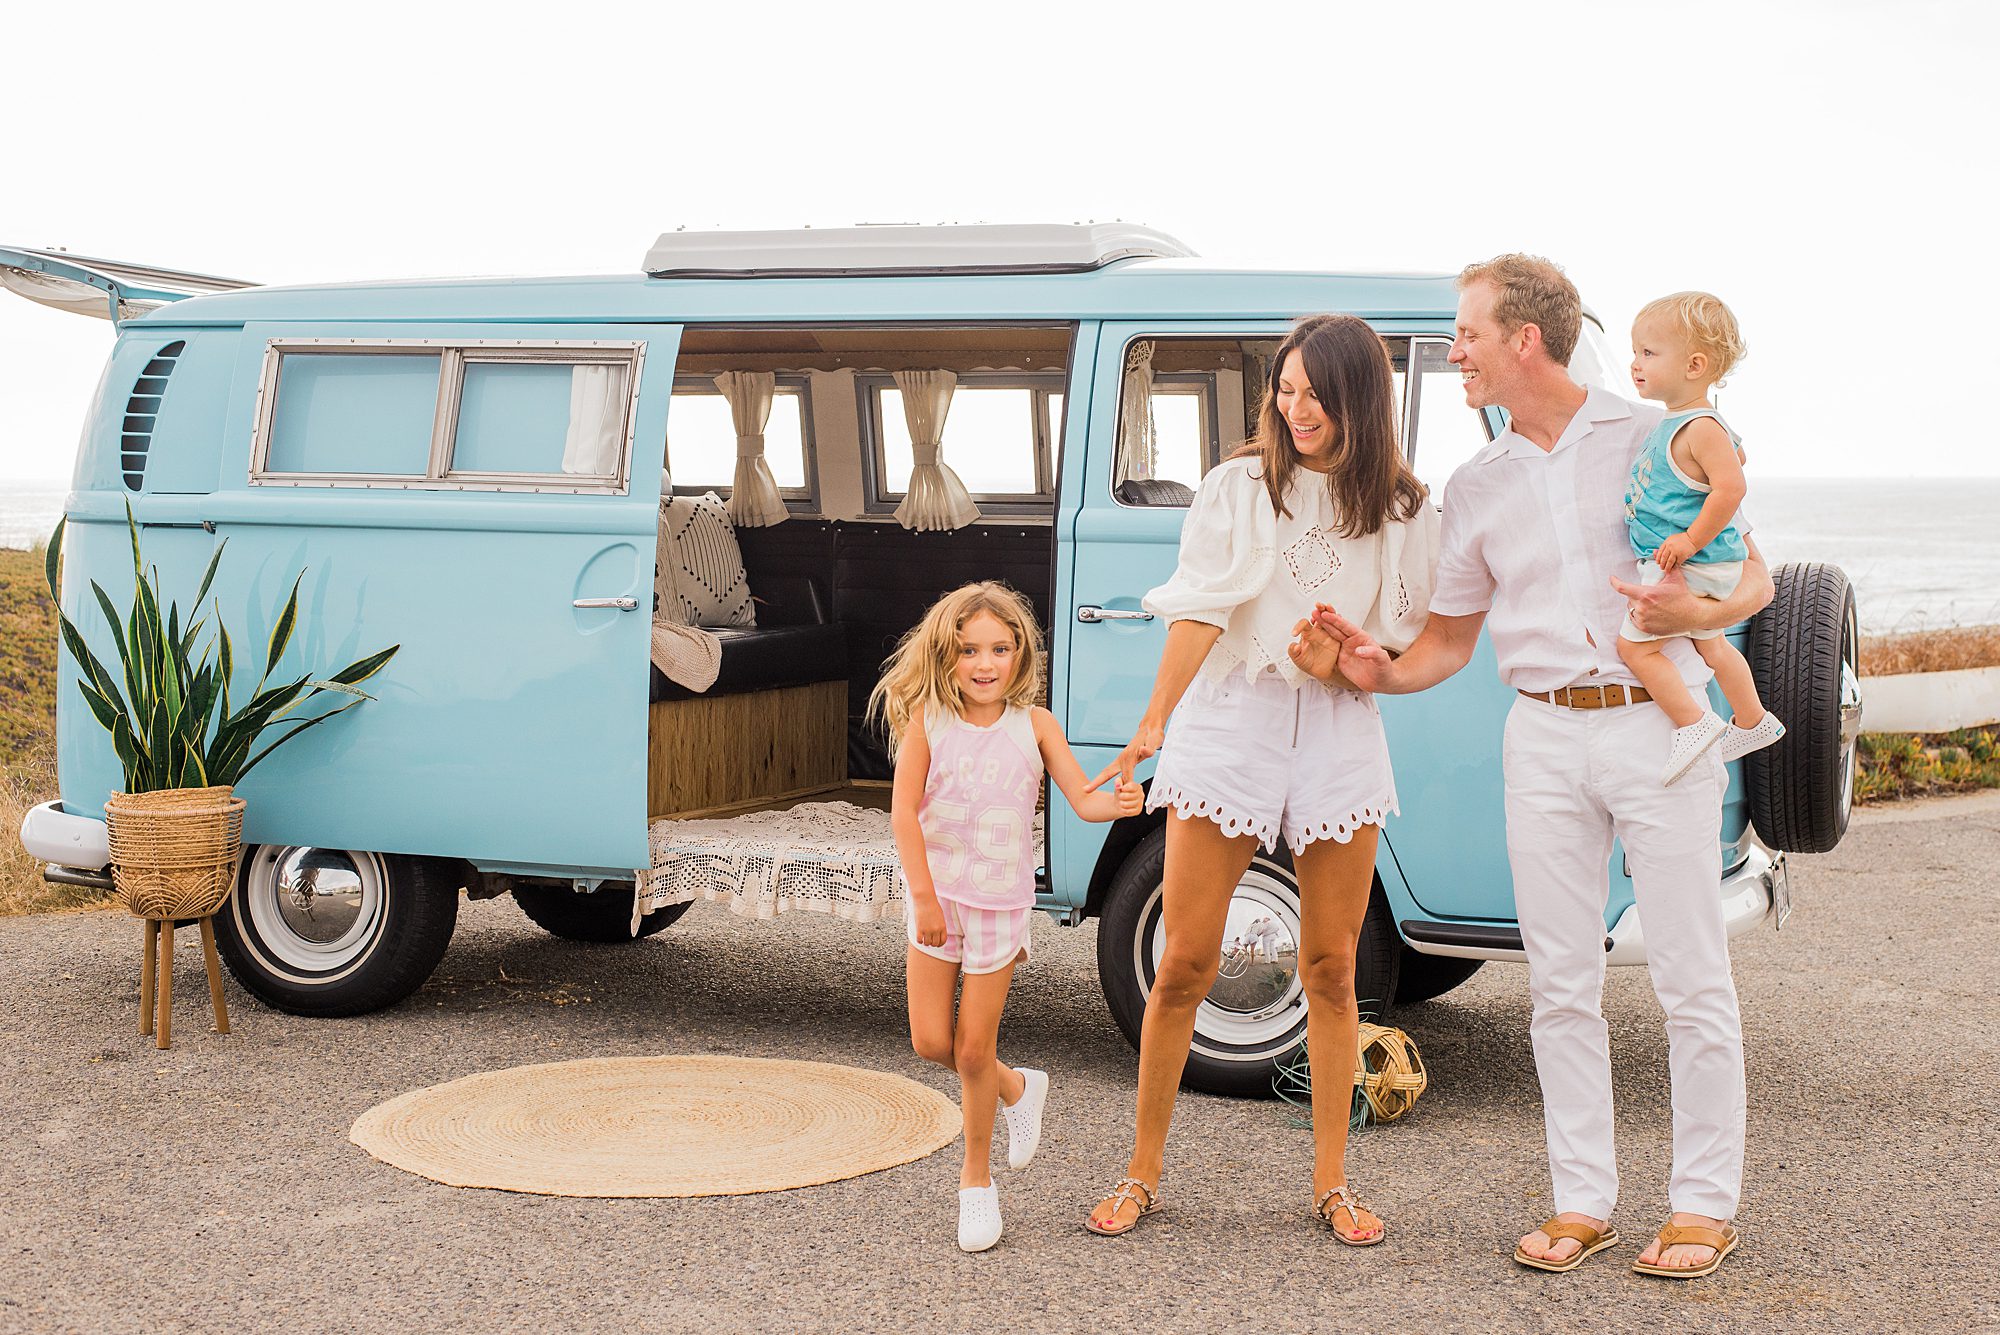 San Diego family portraits with The funky bus